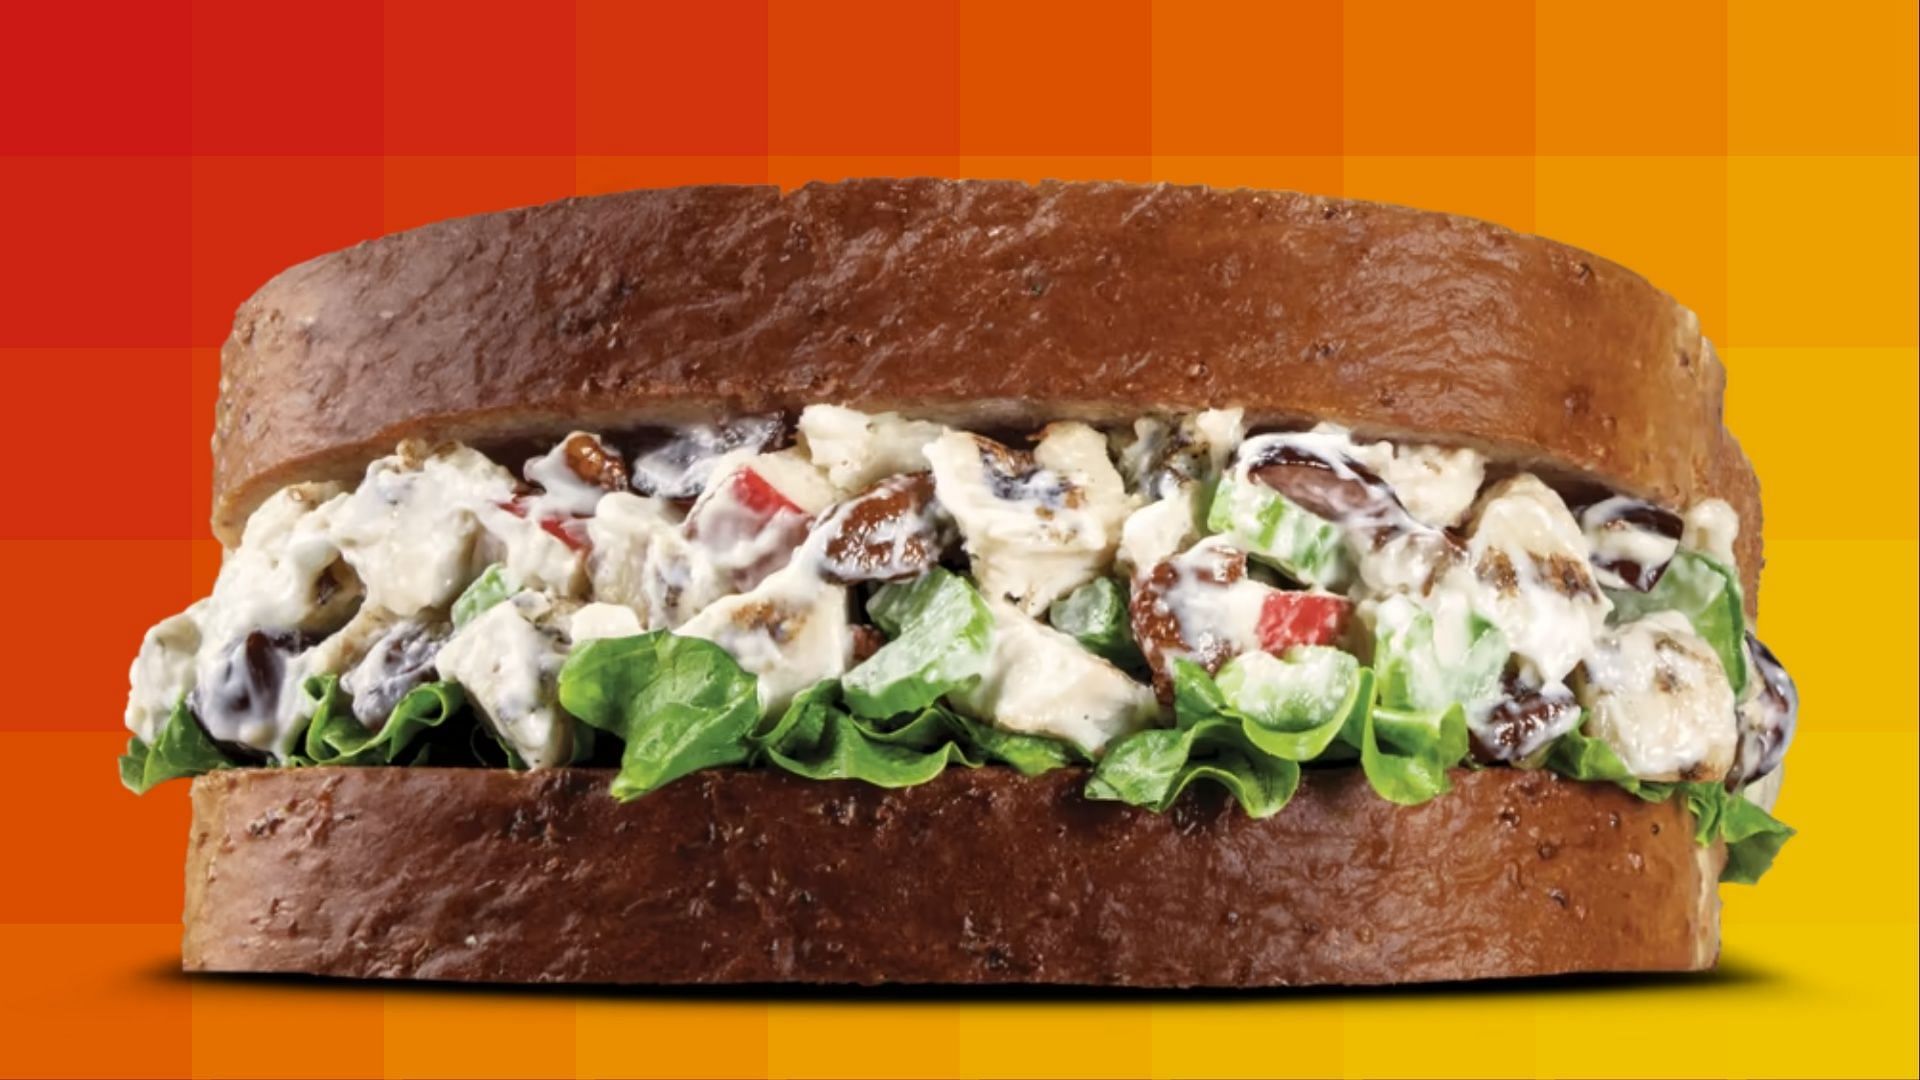 The Pecan Chicken Salad Sandwich packs over 840 calories and costs over $6.29 (Image via Arby&rsquo;s)